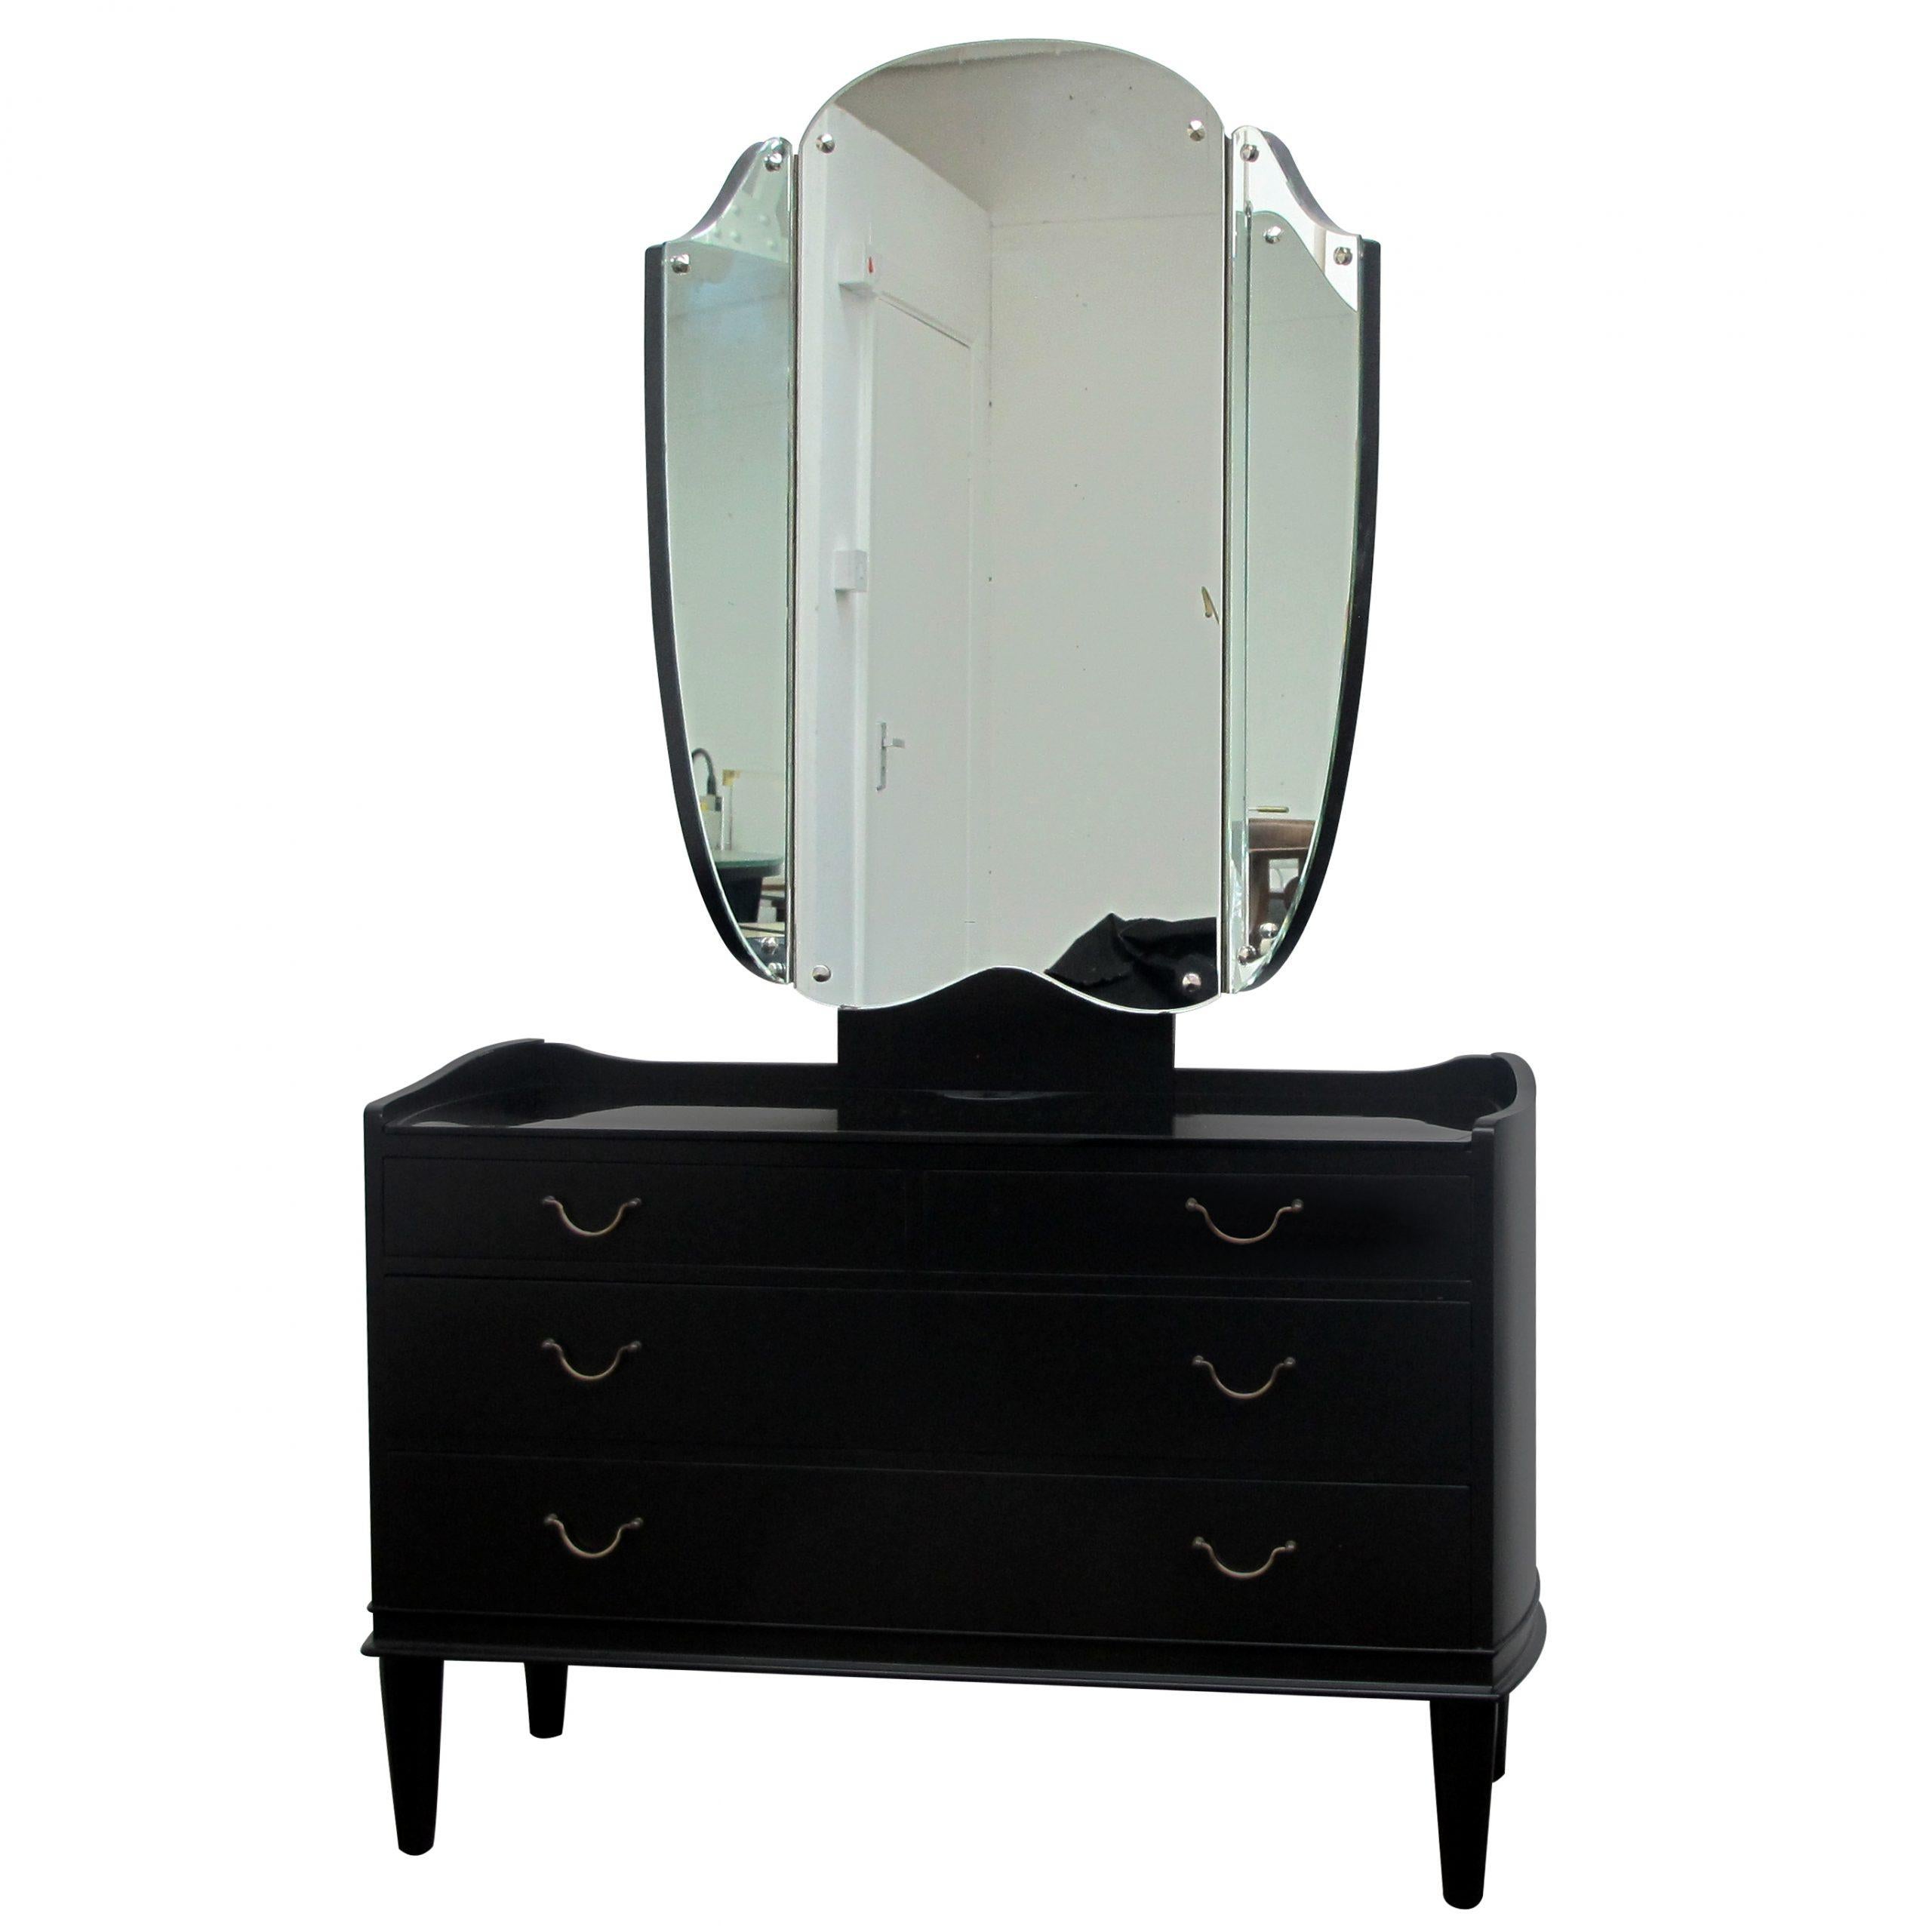 1940s dressing table with a black etched glass top, its original triptych mirror and brass handles. The vanity dressing table offers plenty of storage with its three long drawers. This is a truly elegant minimalistic design.

Size: H161 cm x W101 cm